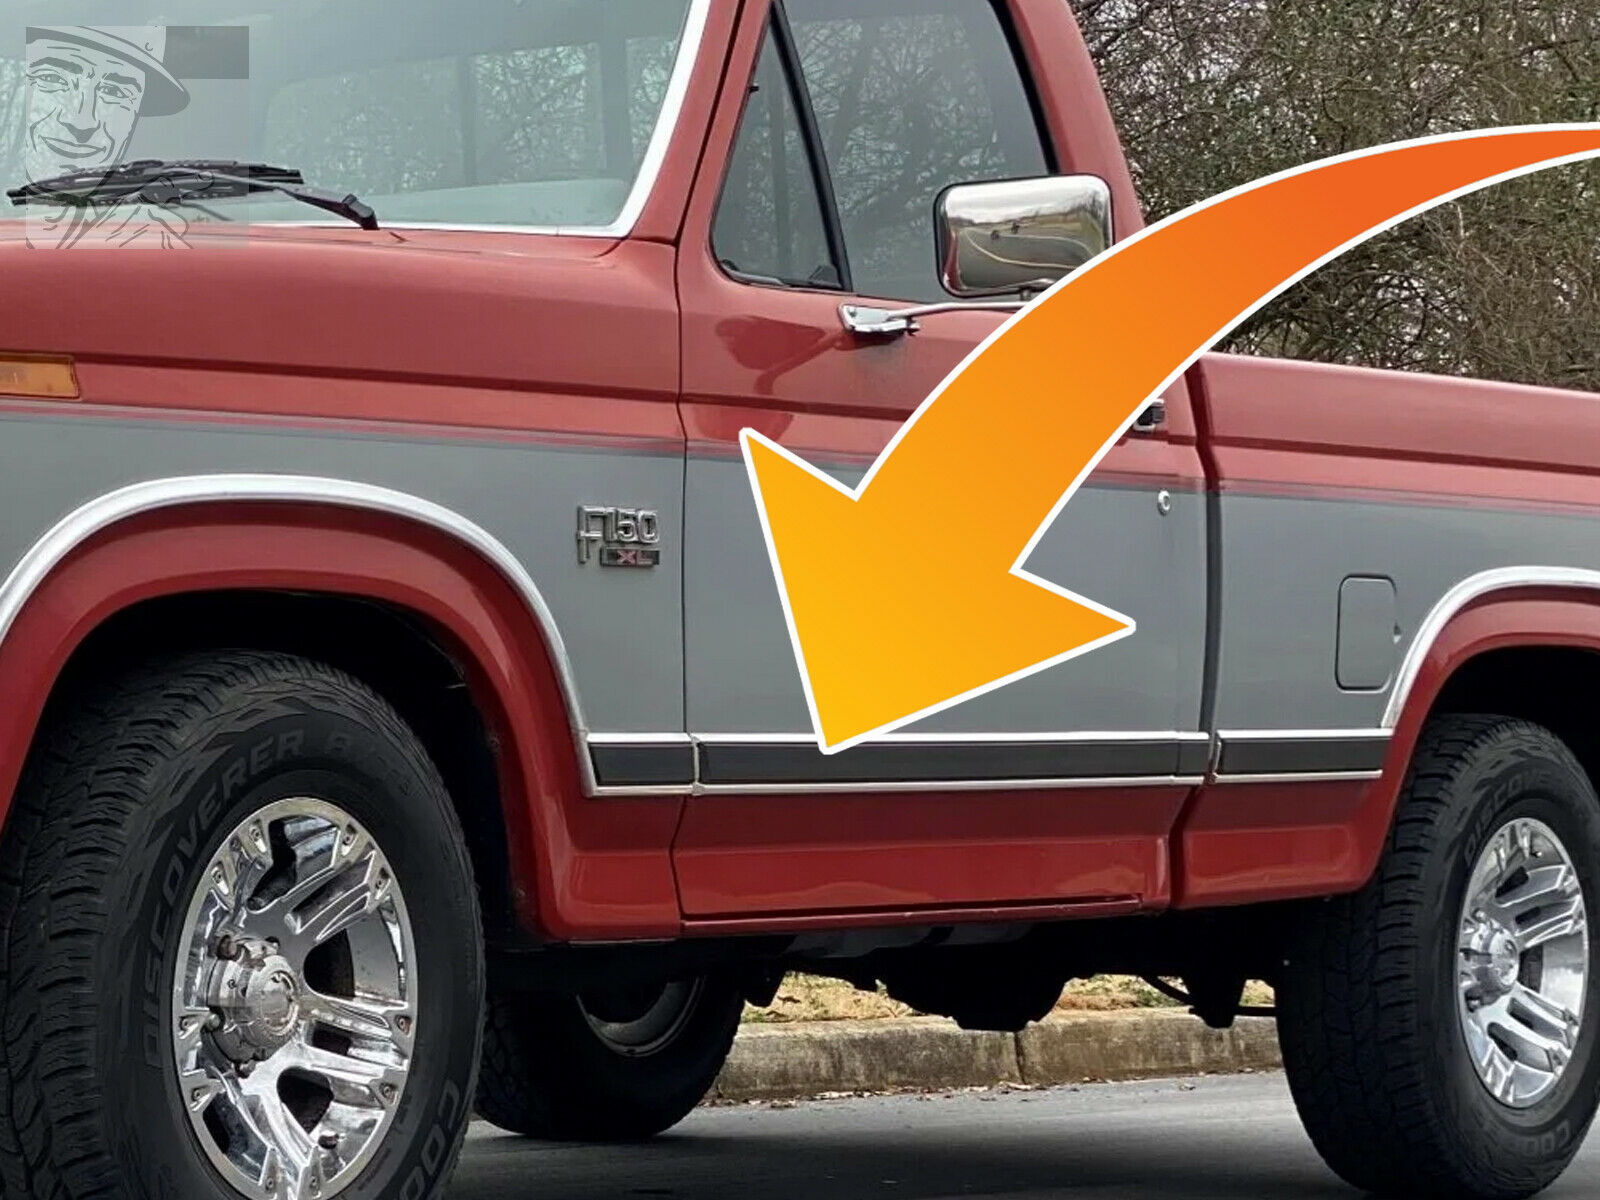 OE Driver Door Lower Body Moulding with Vinyl Insert for 1980 1981 1982 1983 1984 1985 1986 Ford F-Series F150 F250 F350 Bronco. Part Number E0TZ-1020879-AA